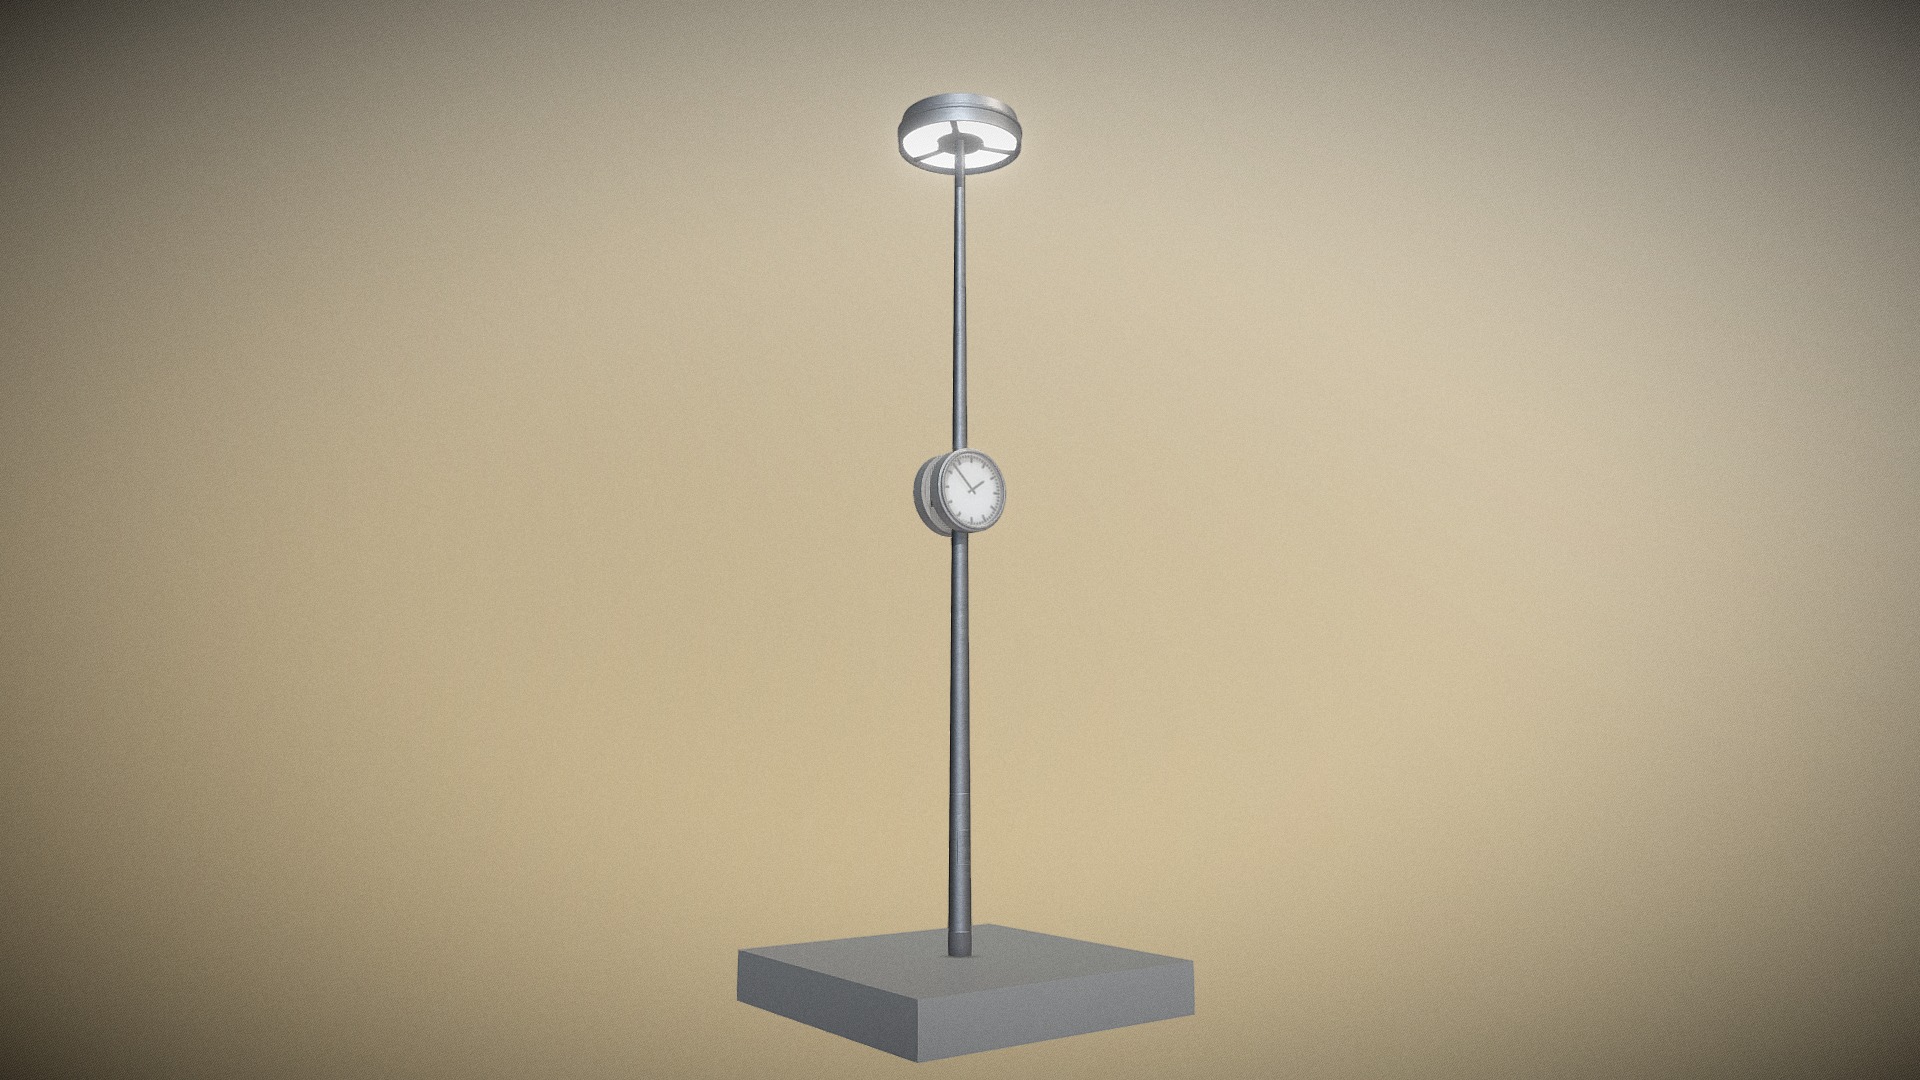 3D model Lamp With Train Station Clock (High-Poly) - This is a 3D model of the Lamp With Train Station Clock (High-Poly). The 3D model is about a lamp on a stand.